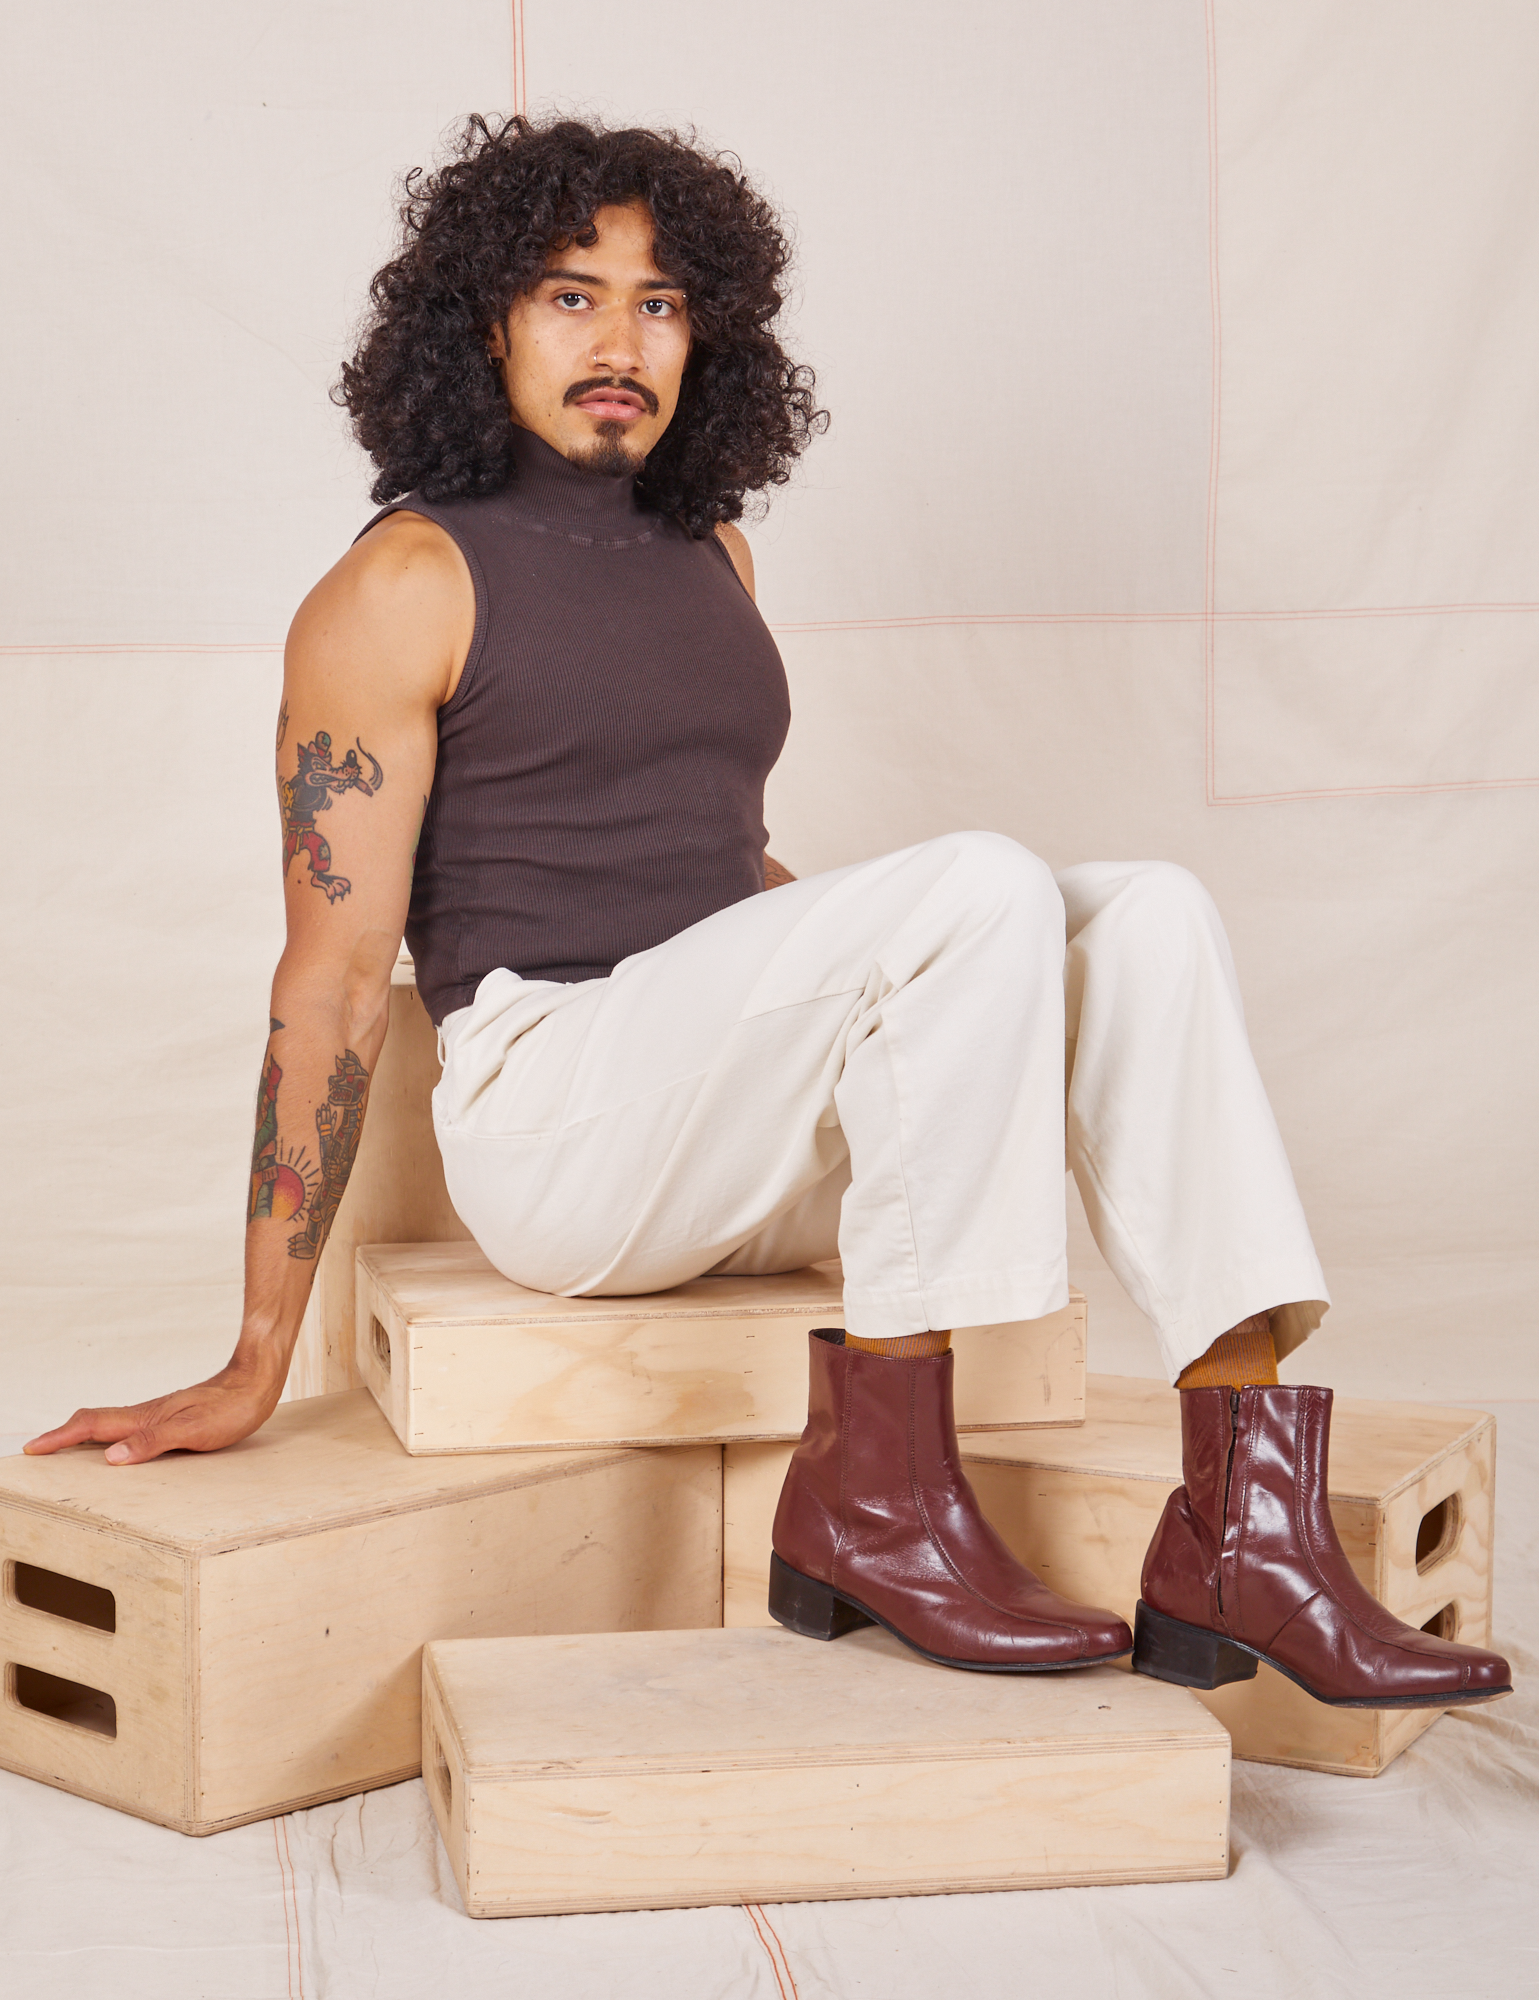 Jesse is sitting on a stack of wooden crates. They are wearing Heavyweight Trousers in Vintage Tee Off-White and espresso brown Sleeveless Turtleneck.